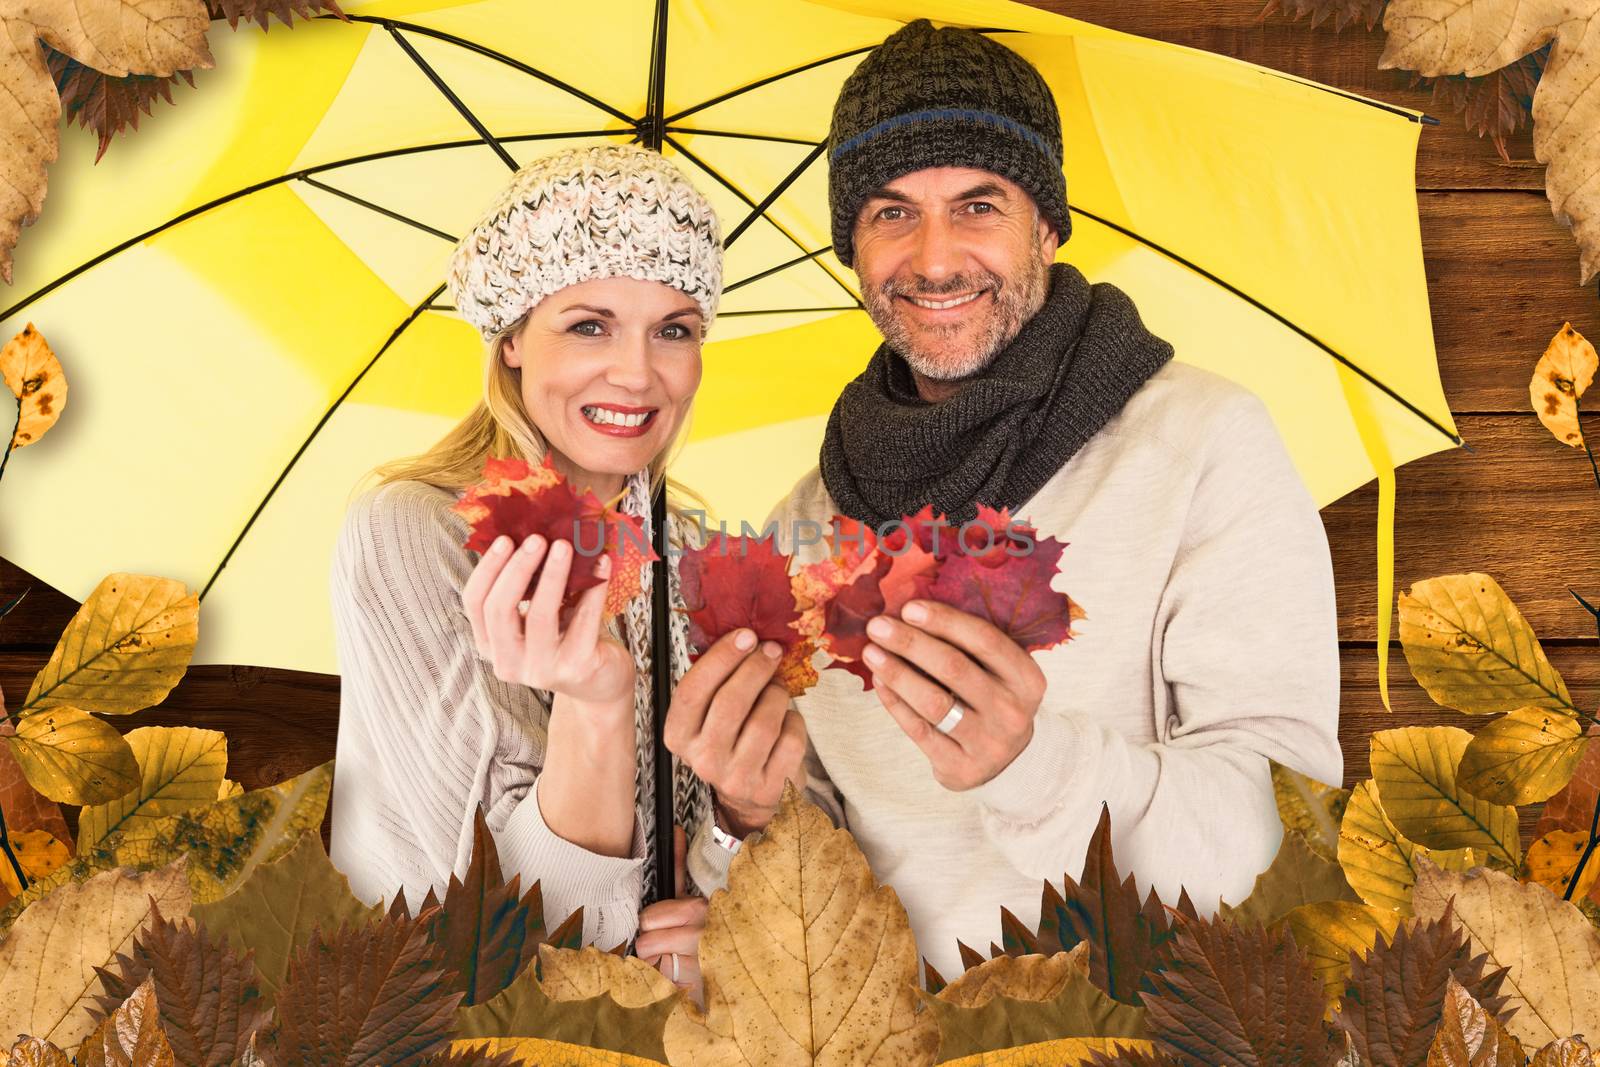 Portrait of couple holding autumn leaves while standing under yellow umbrella against overhead of wooden planks